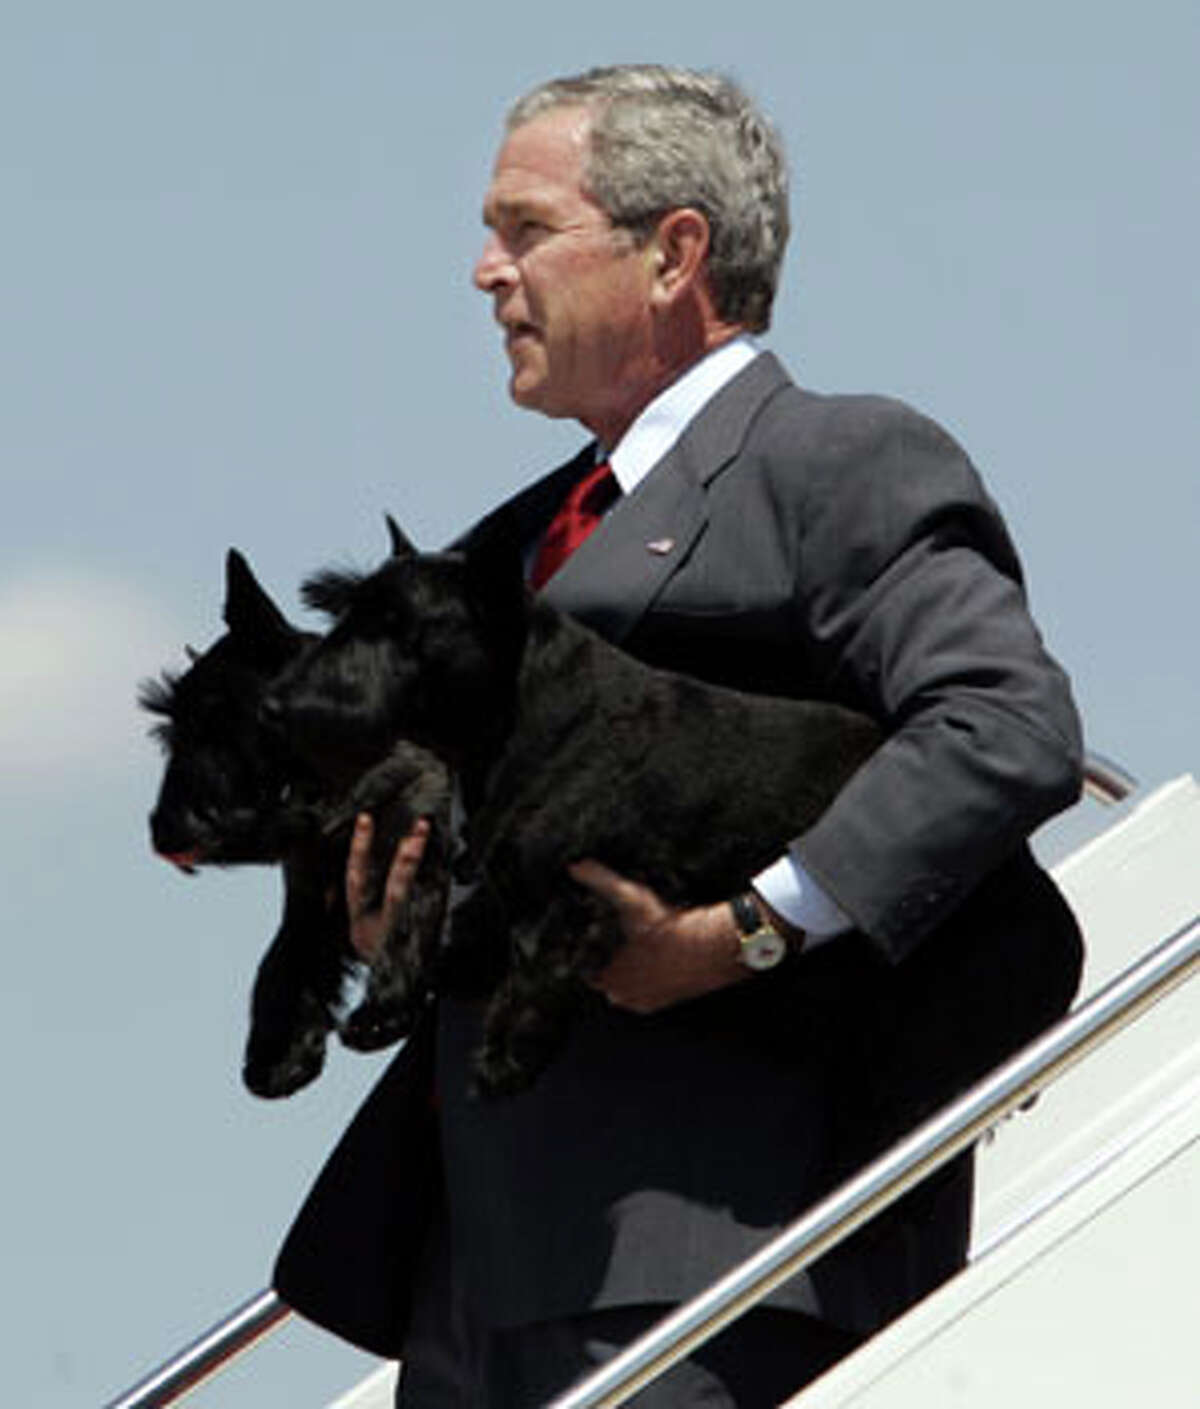 First Pets, the furry friends of U.S. Presidents